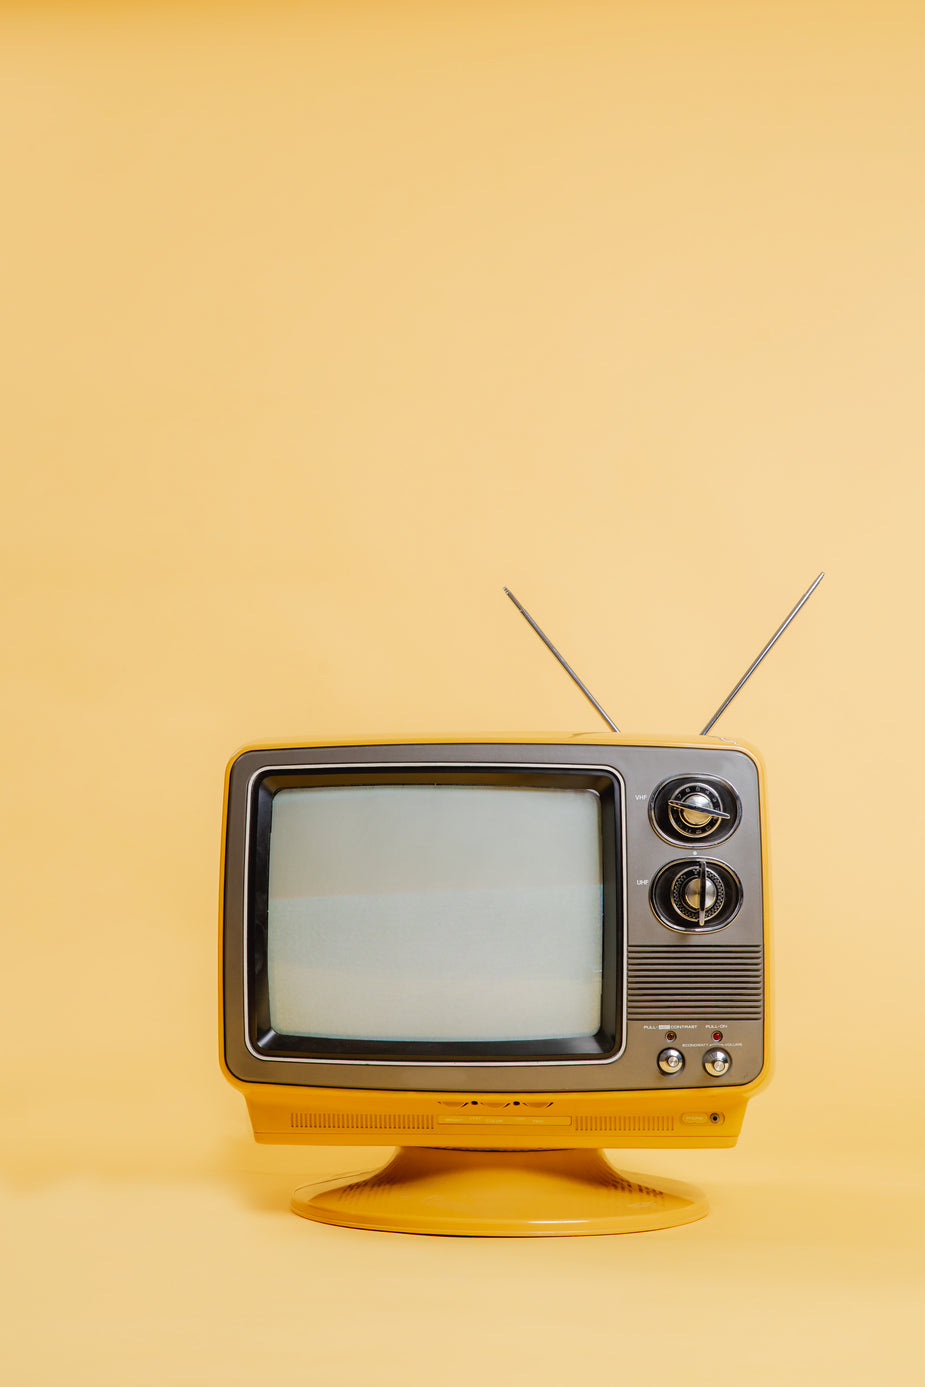 Browse Free HD Images of Yellow TV Set On Monochromatic Seamless Backdrop